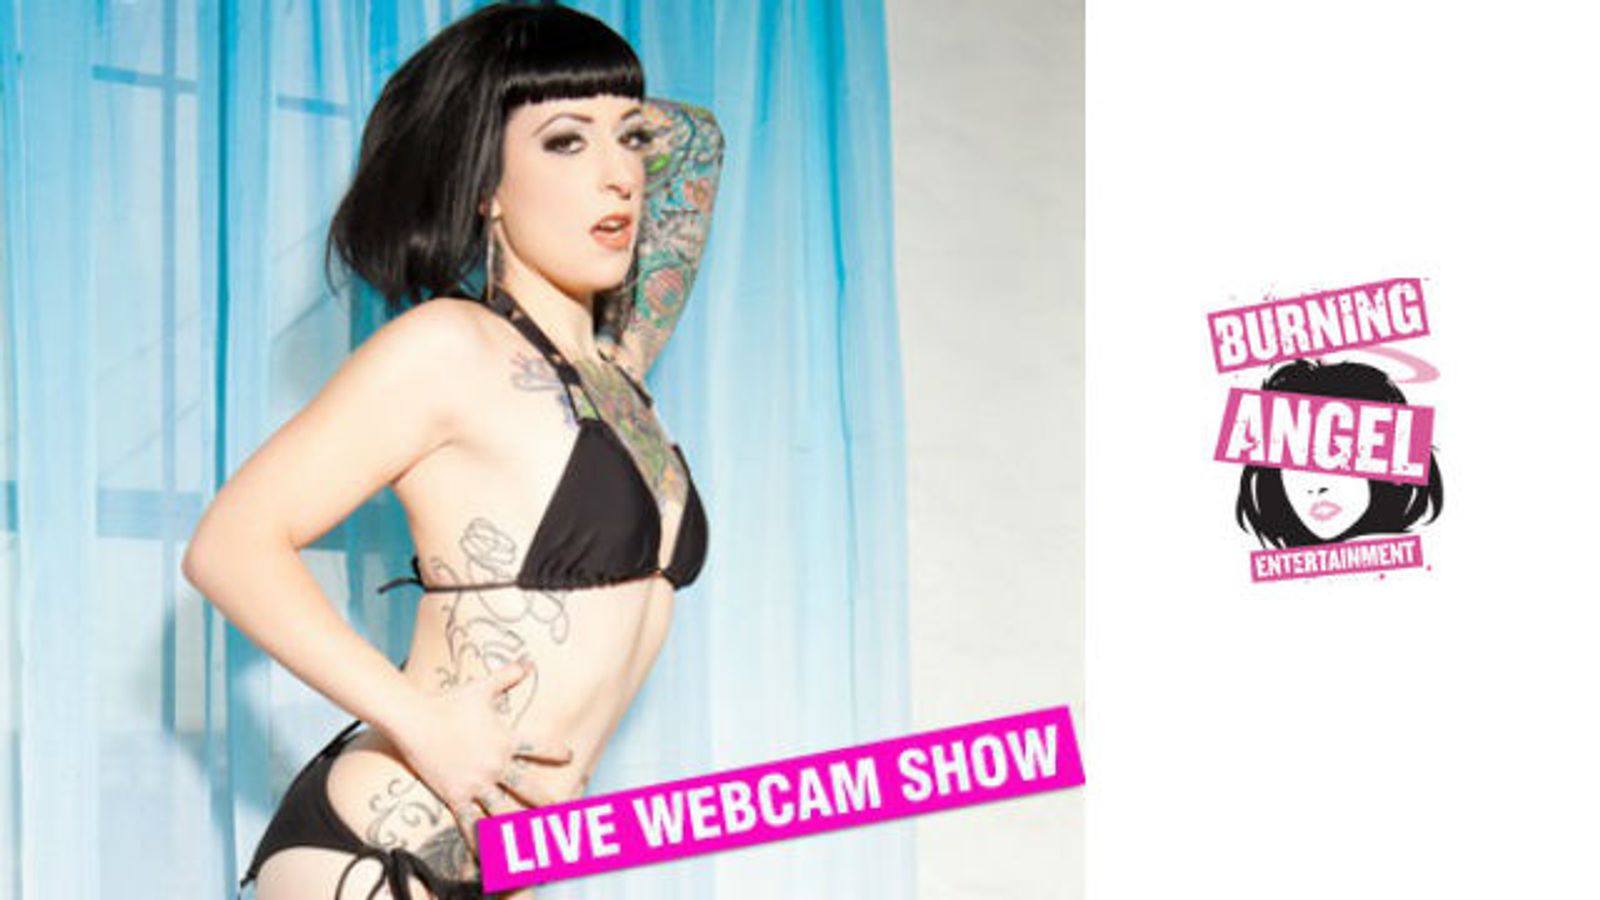 Miss Genocide is on BurningAngel Webcam Show This Thursday